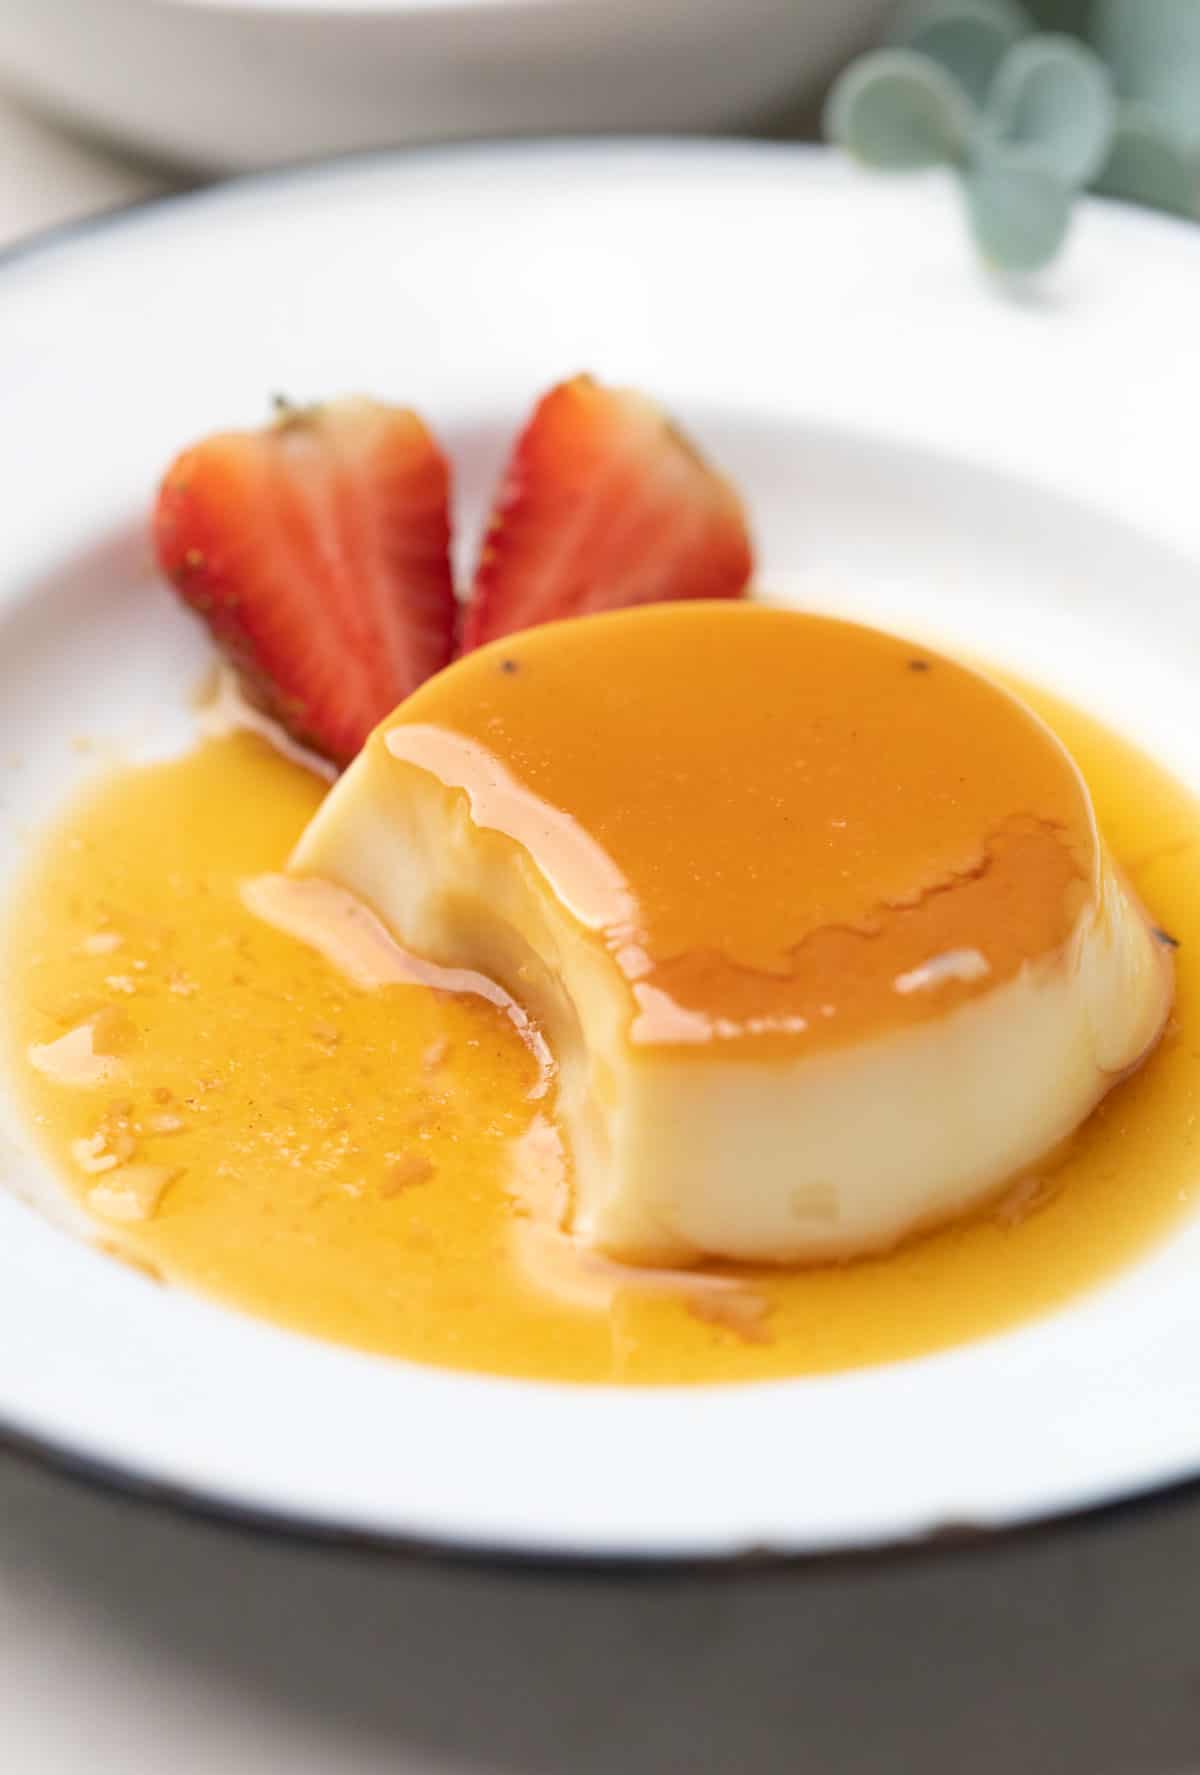 caramel cusstard served on a white plate with strawberries on the side.